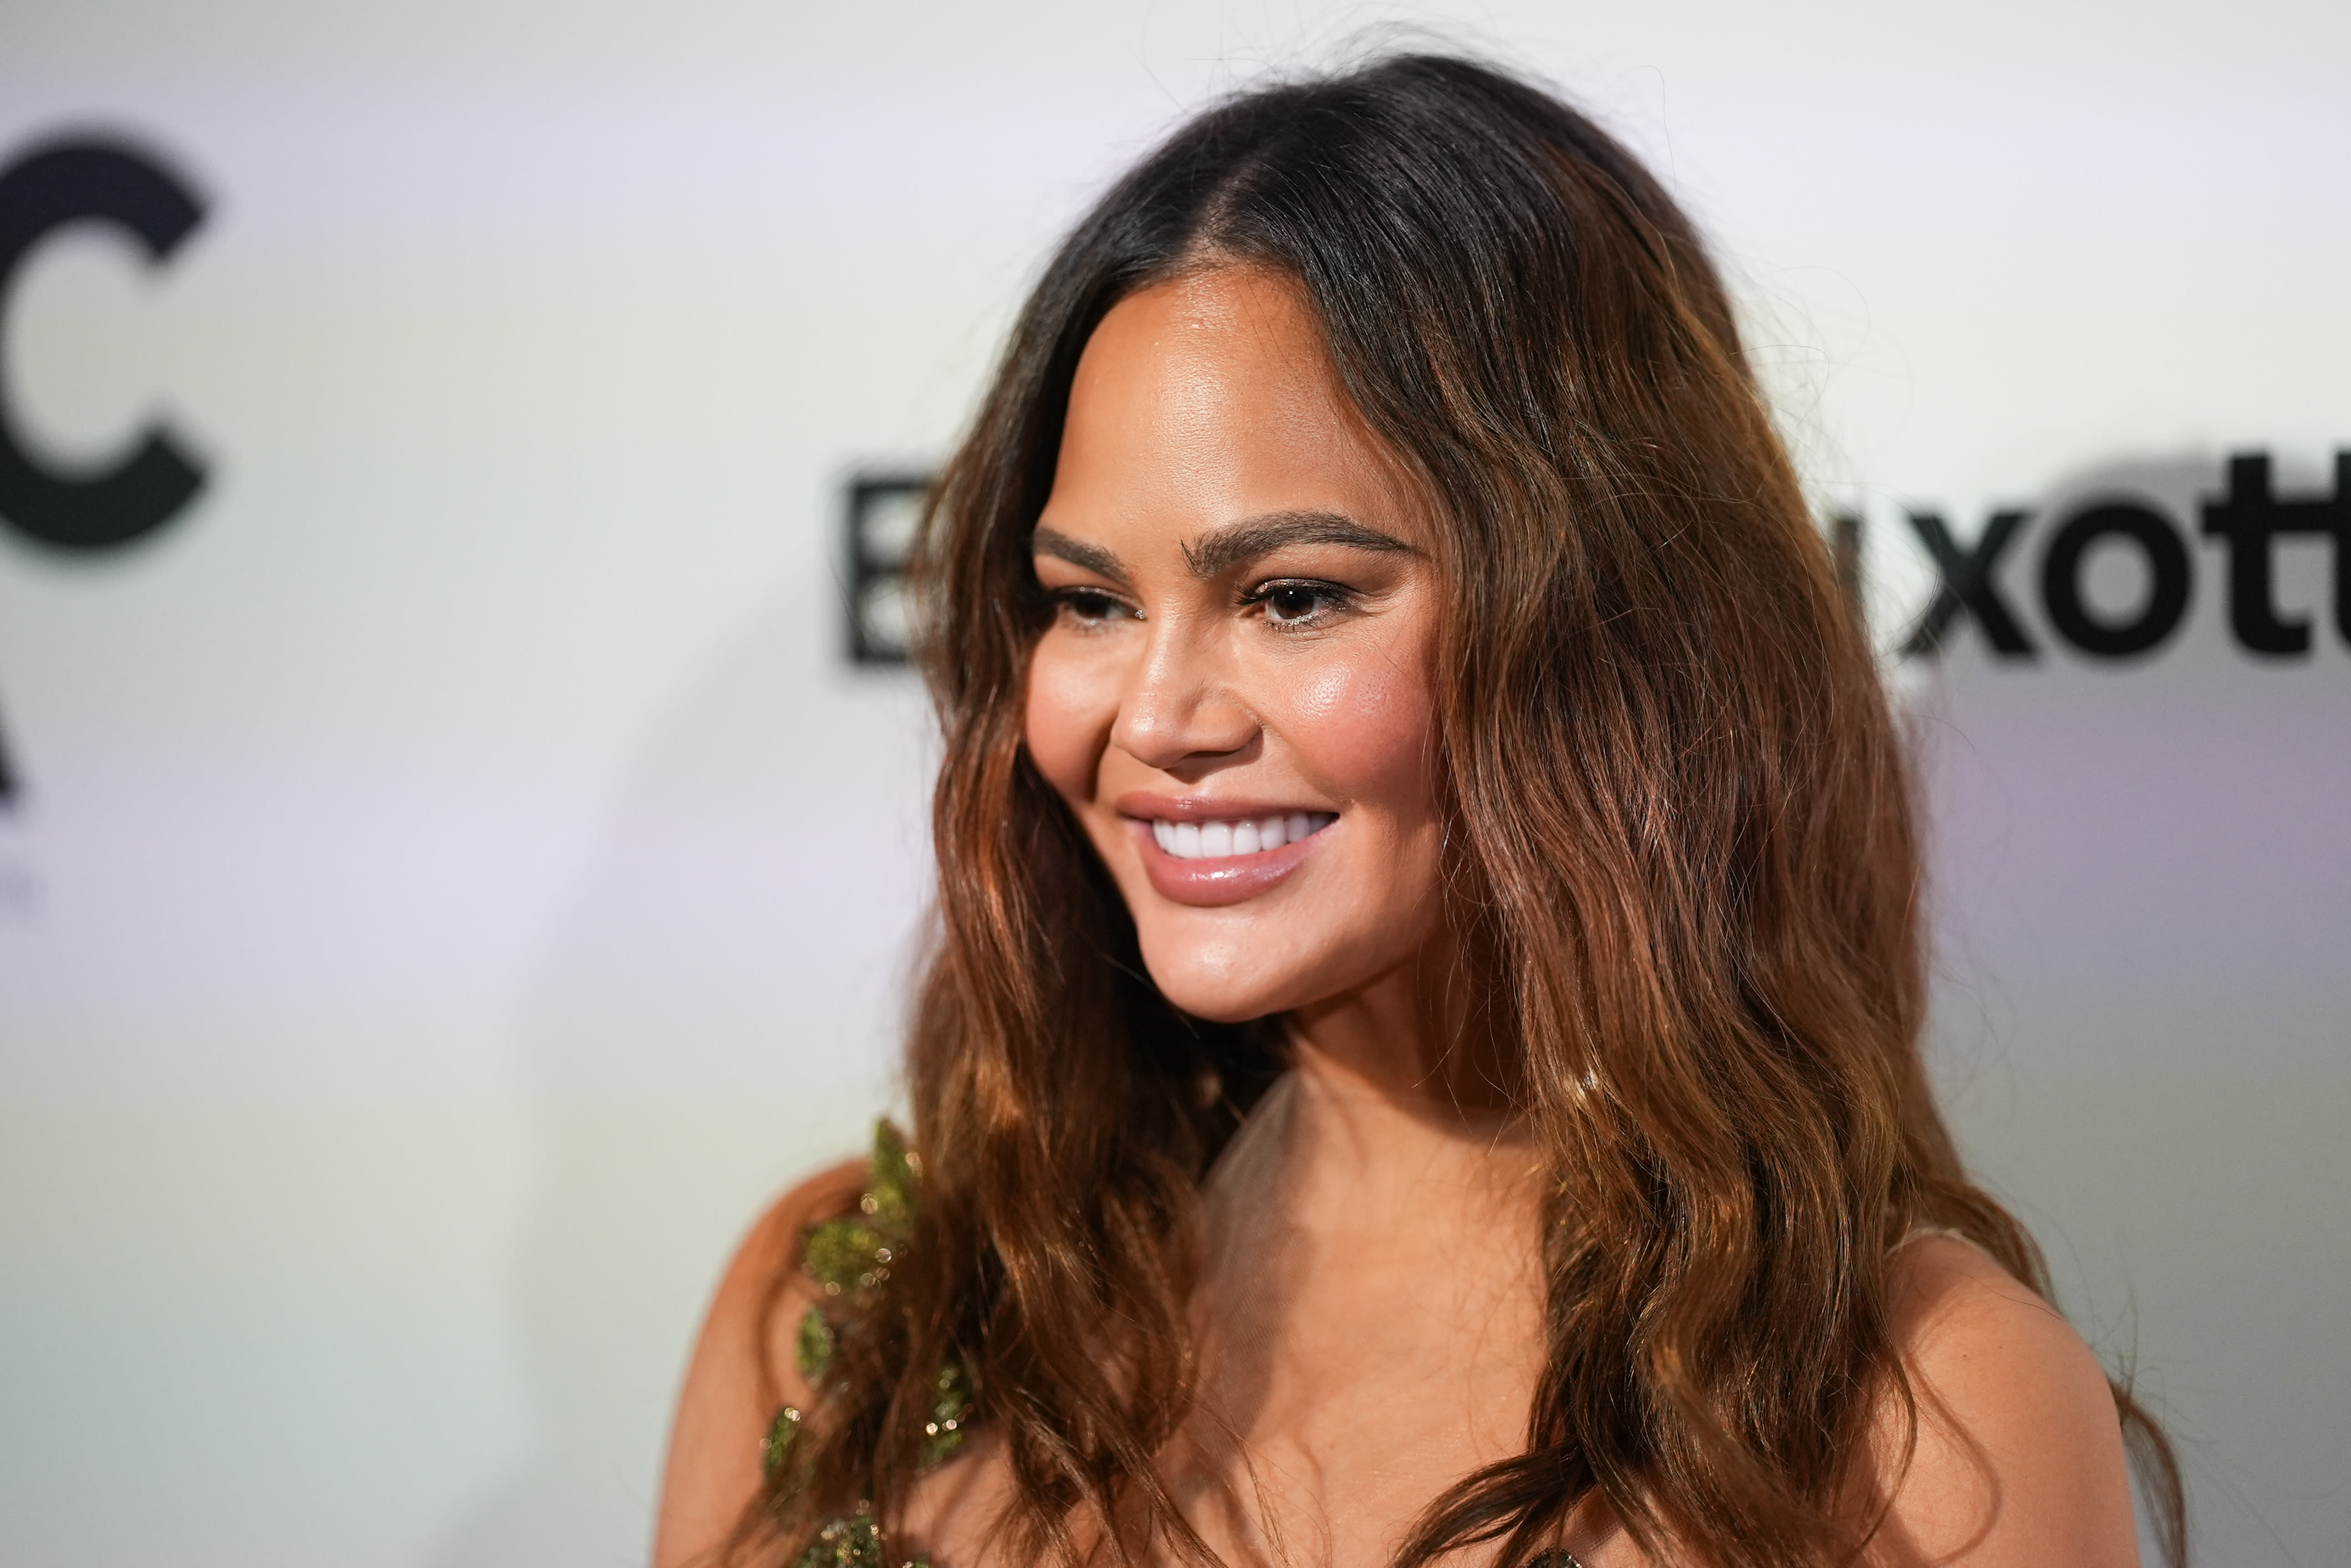 Chrissy Teigen Compared Parenting to ‘Yachting’ & It’s the Best Thing on the Internet